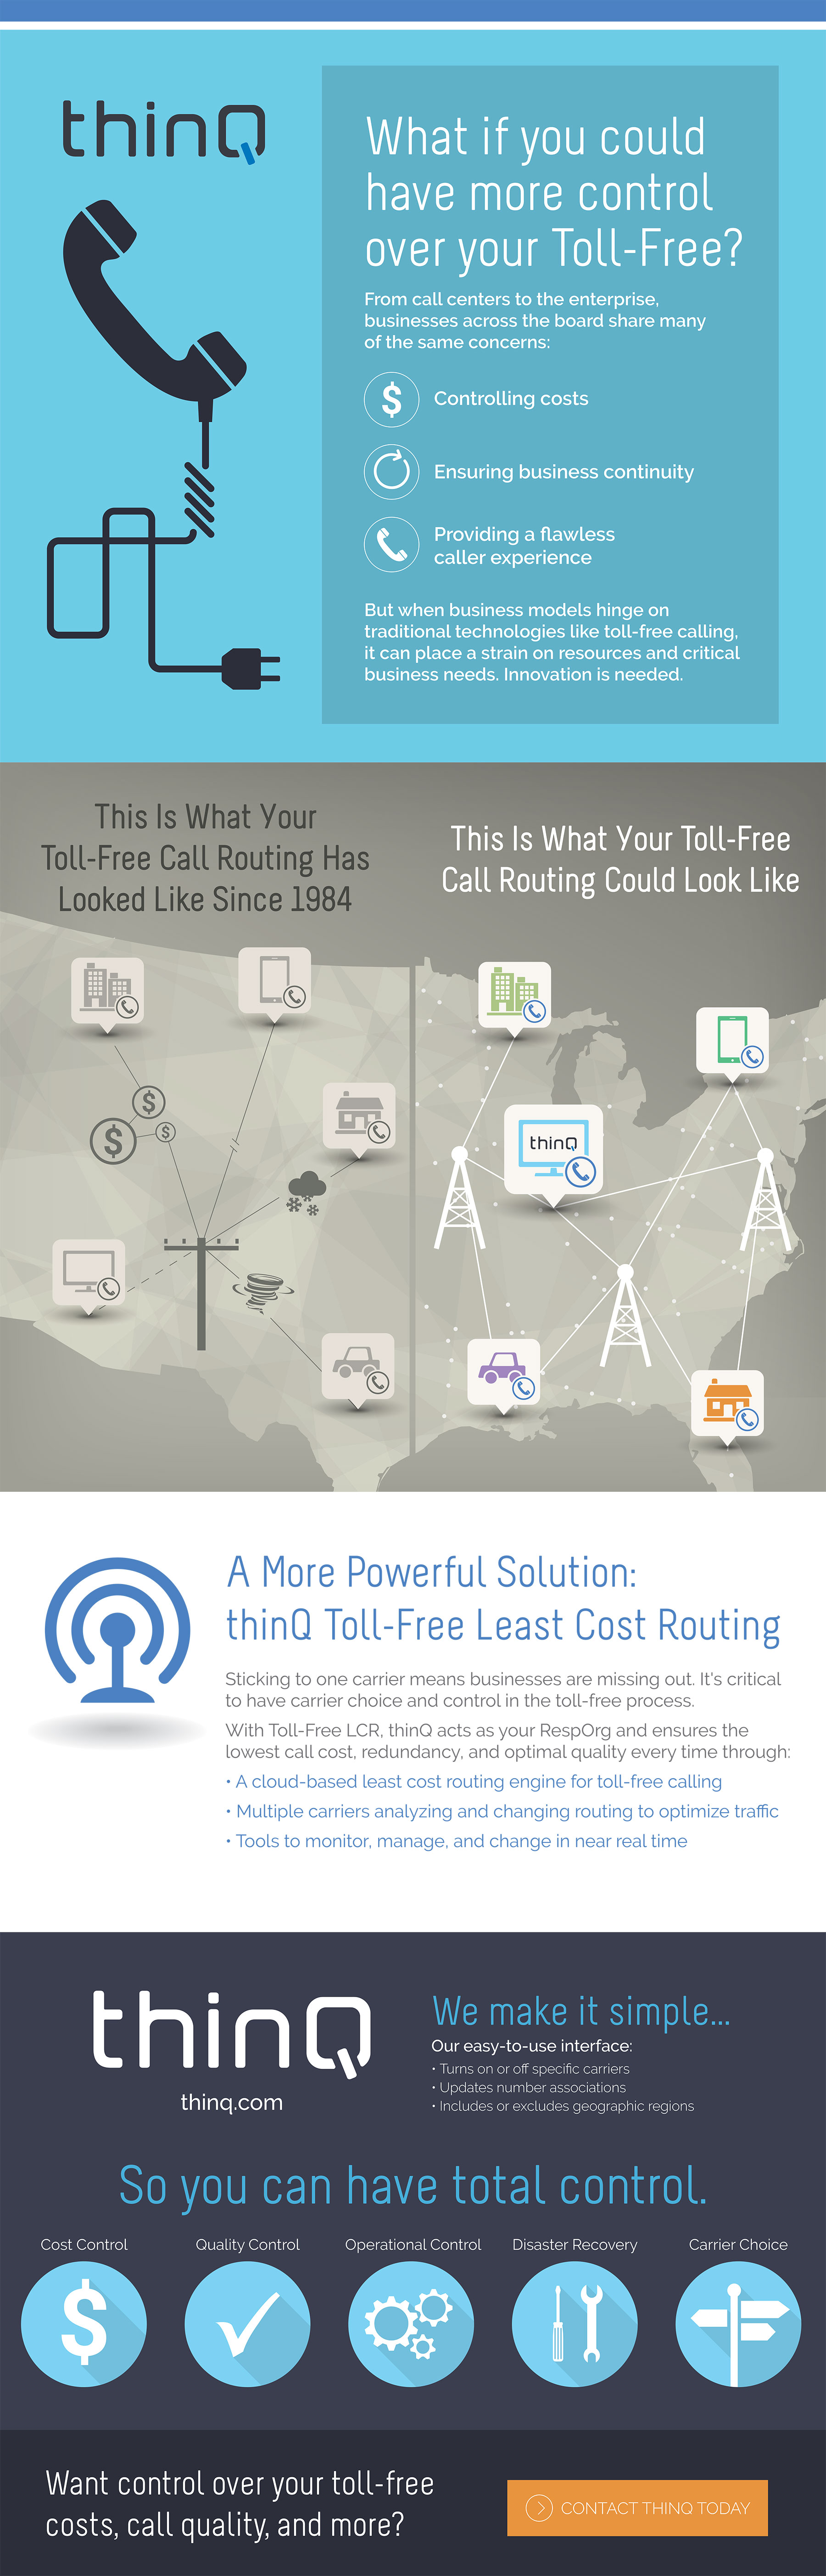 Toll-free least cost routing (LCR) gives you more control.